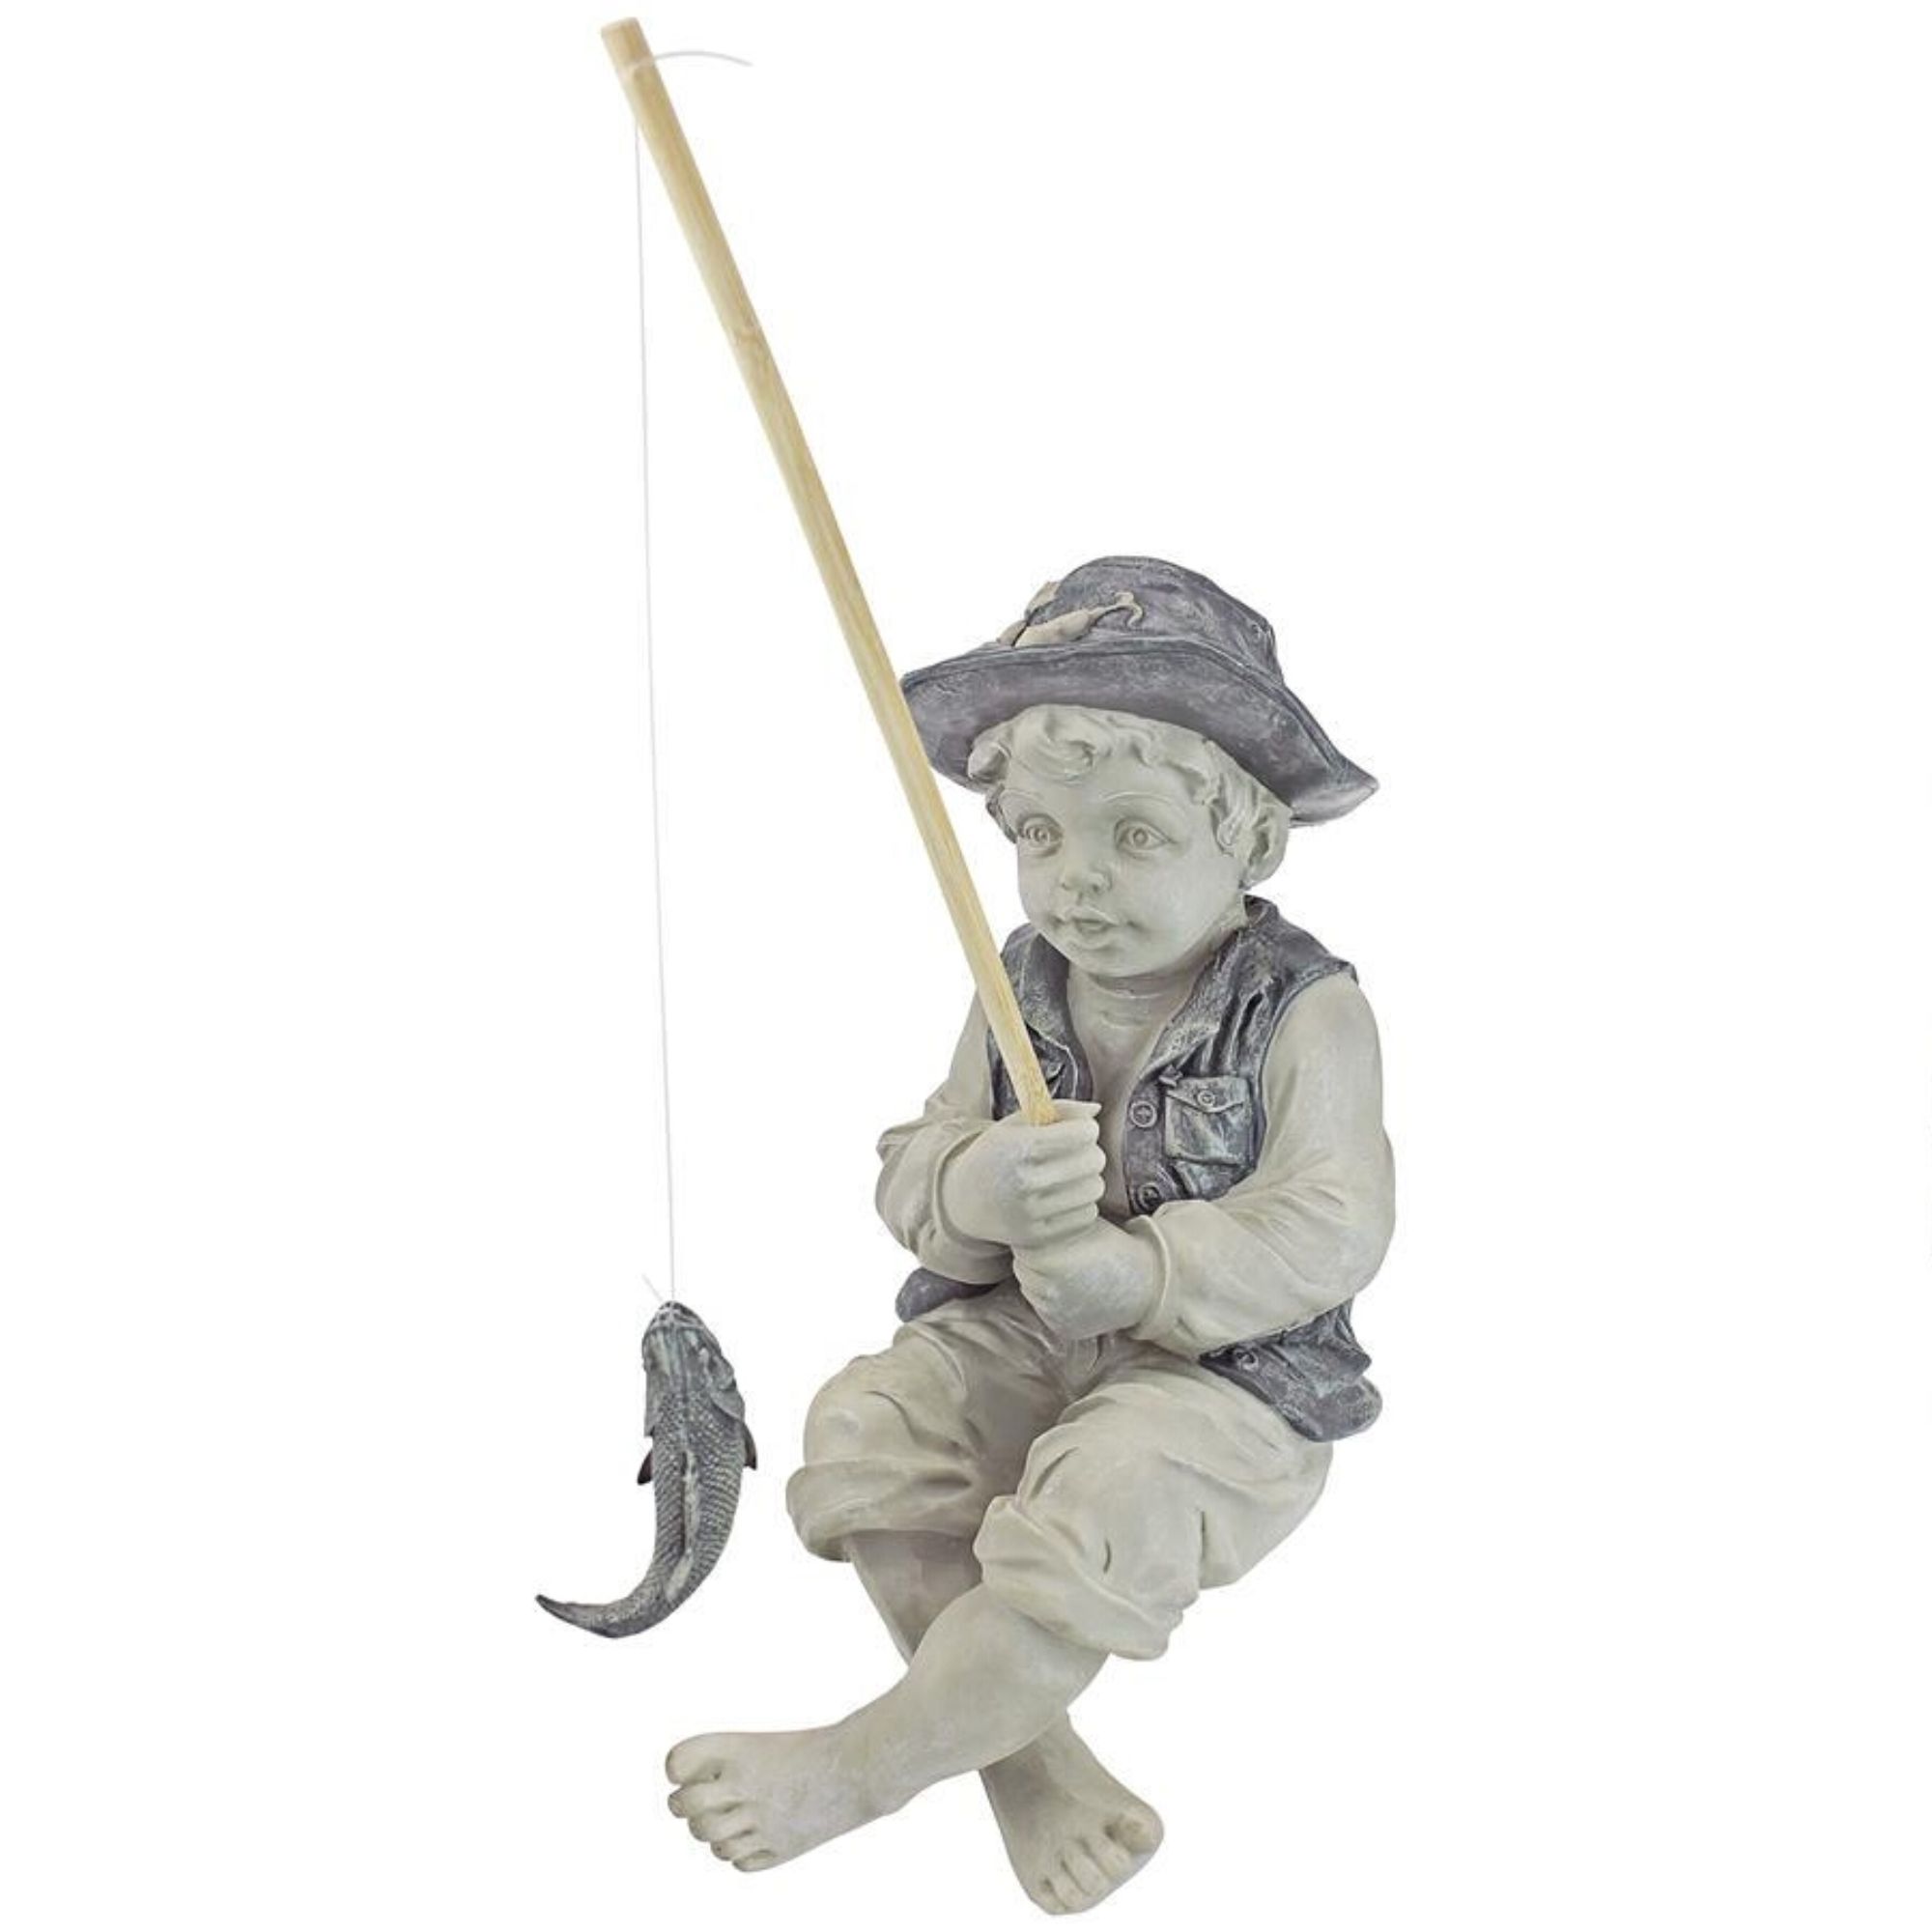 Outdoor Living and Style 15" Frederic the Little Fisherman of Avignon Outdoor Garden Statue